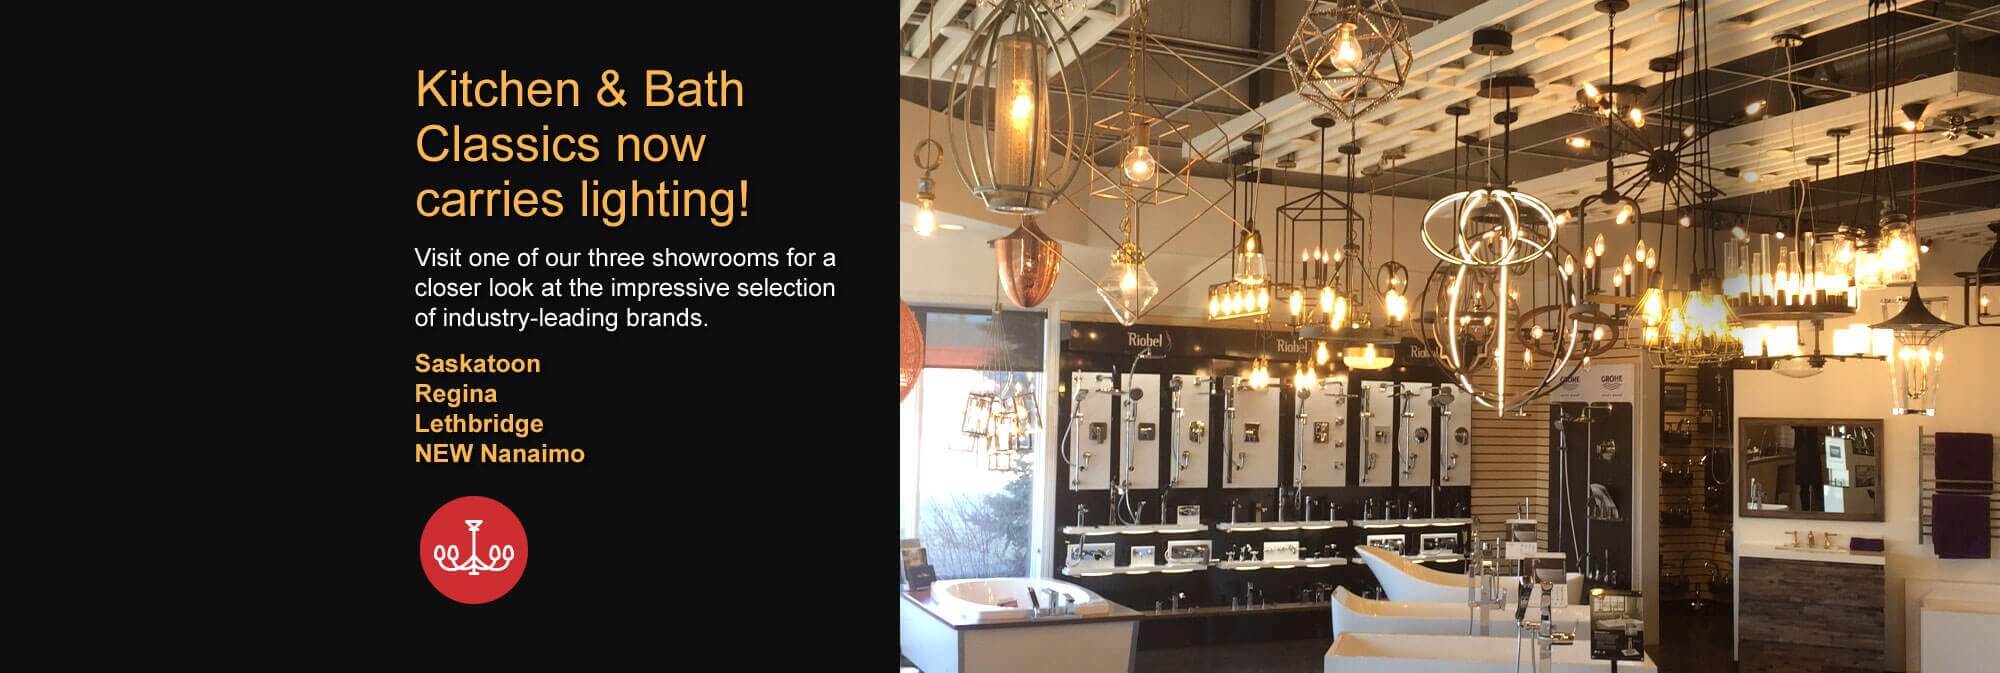 Kitchen and Bath Classics now carries Lighting